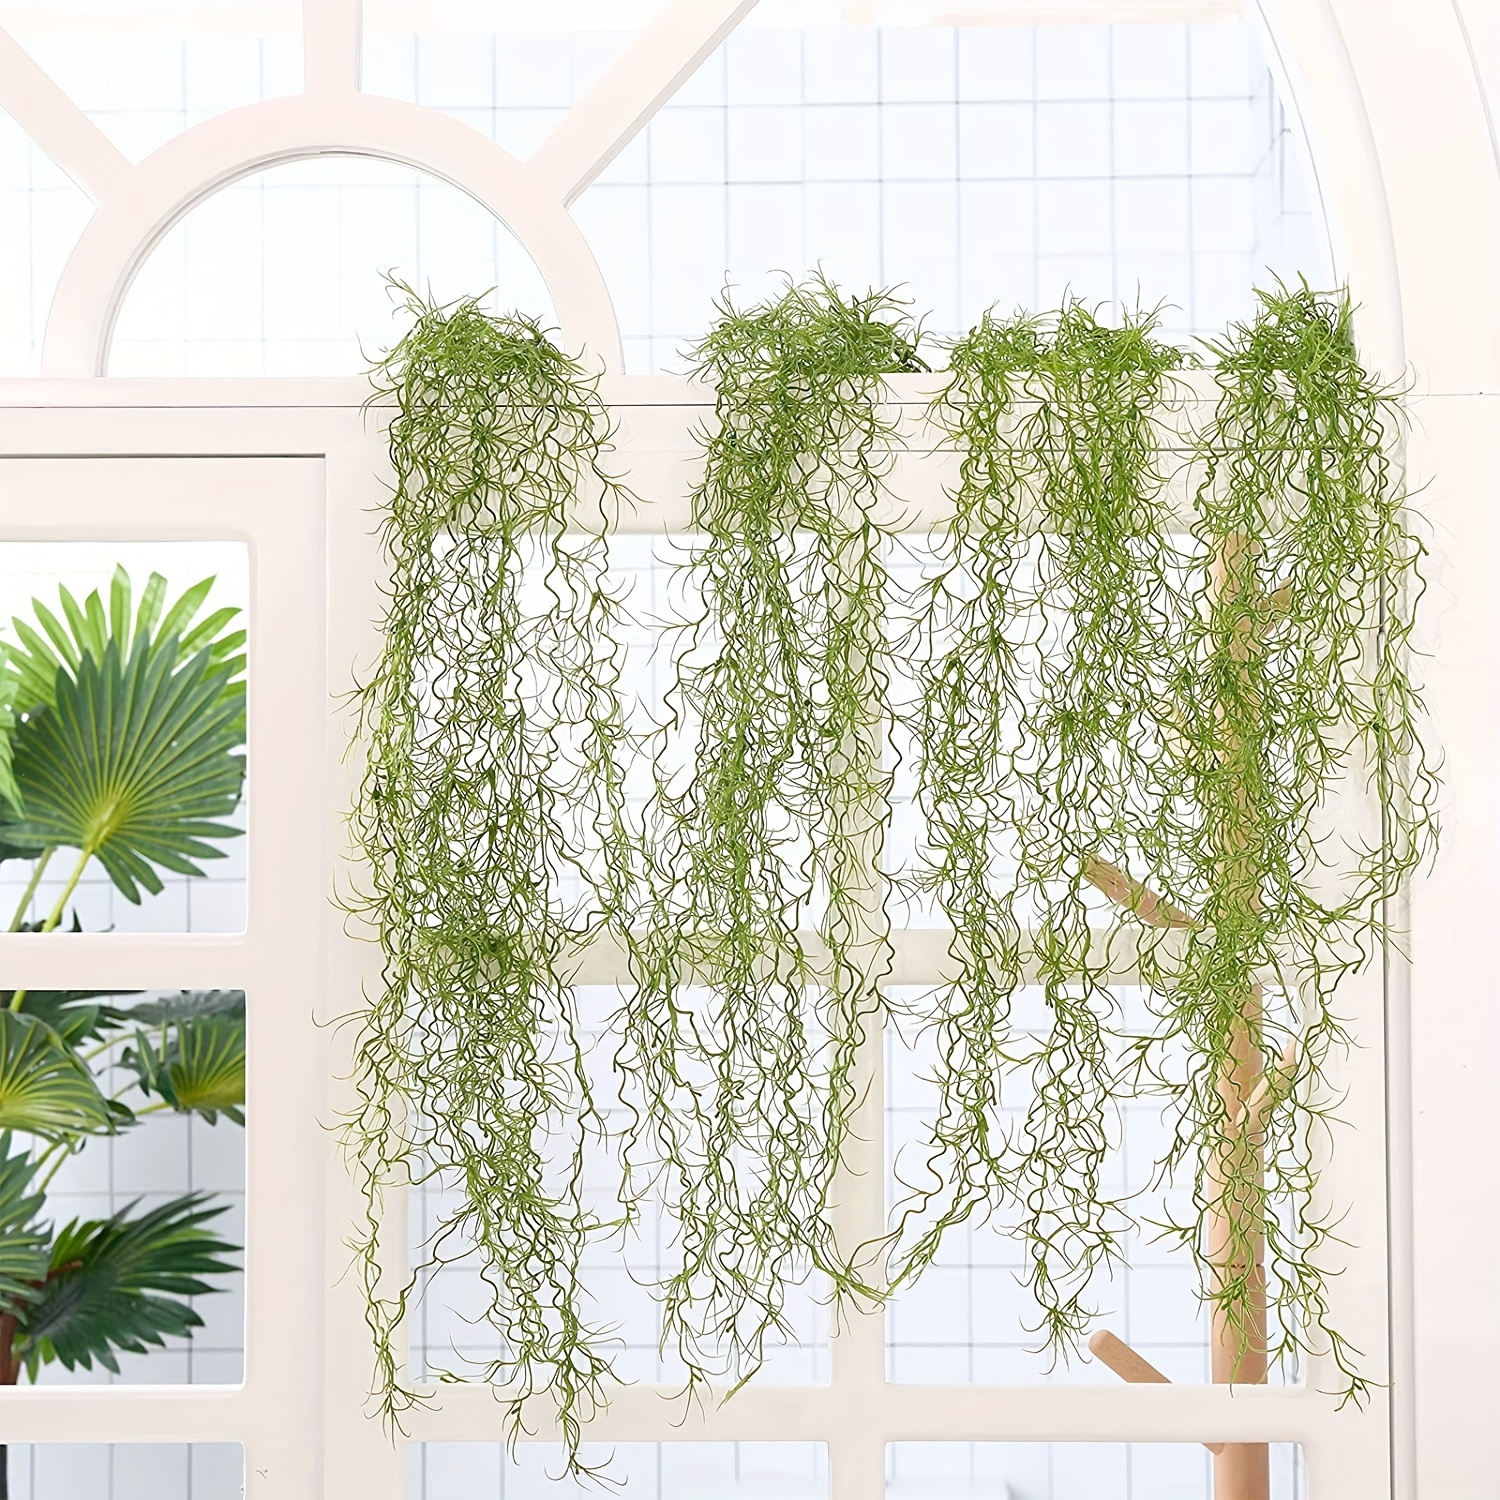 SEEKO Spanish Moss, Christmas Tree Decorations, Fake Moss for Artificial  Hanging Plants & Moss for Plants - (3pck, 33 Long) - Moss Décor Hanging  Vines - Succulent Plants Artificial